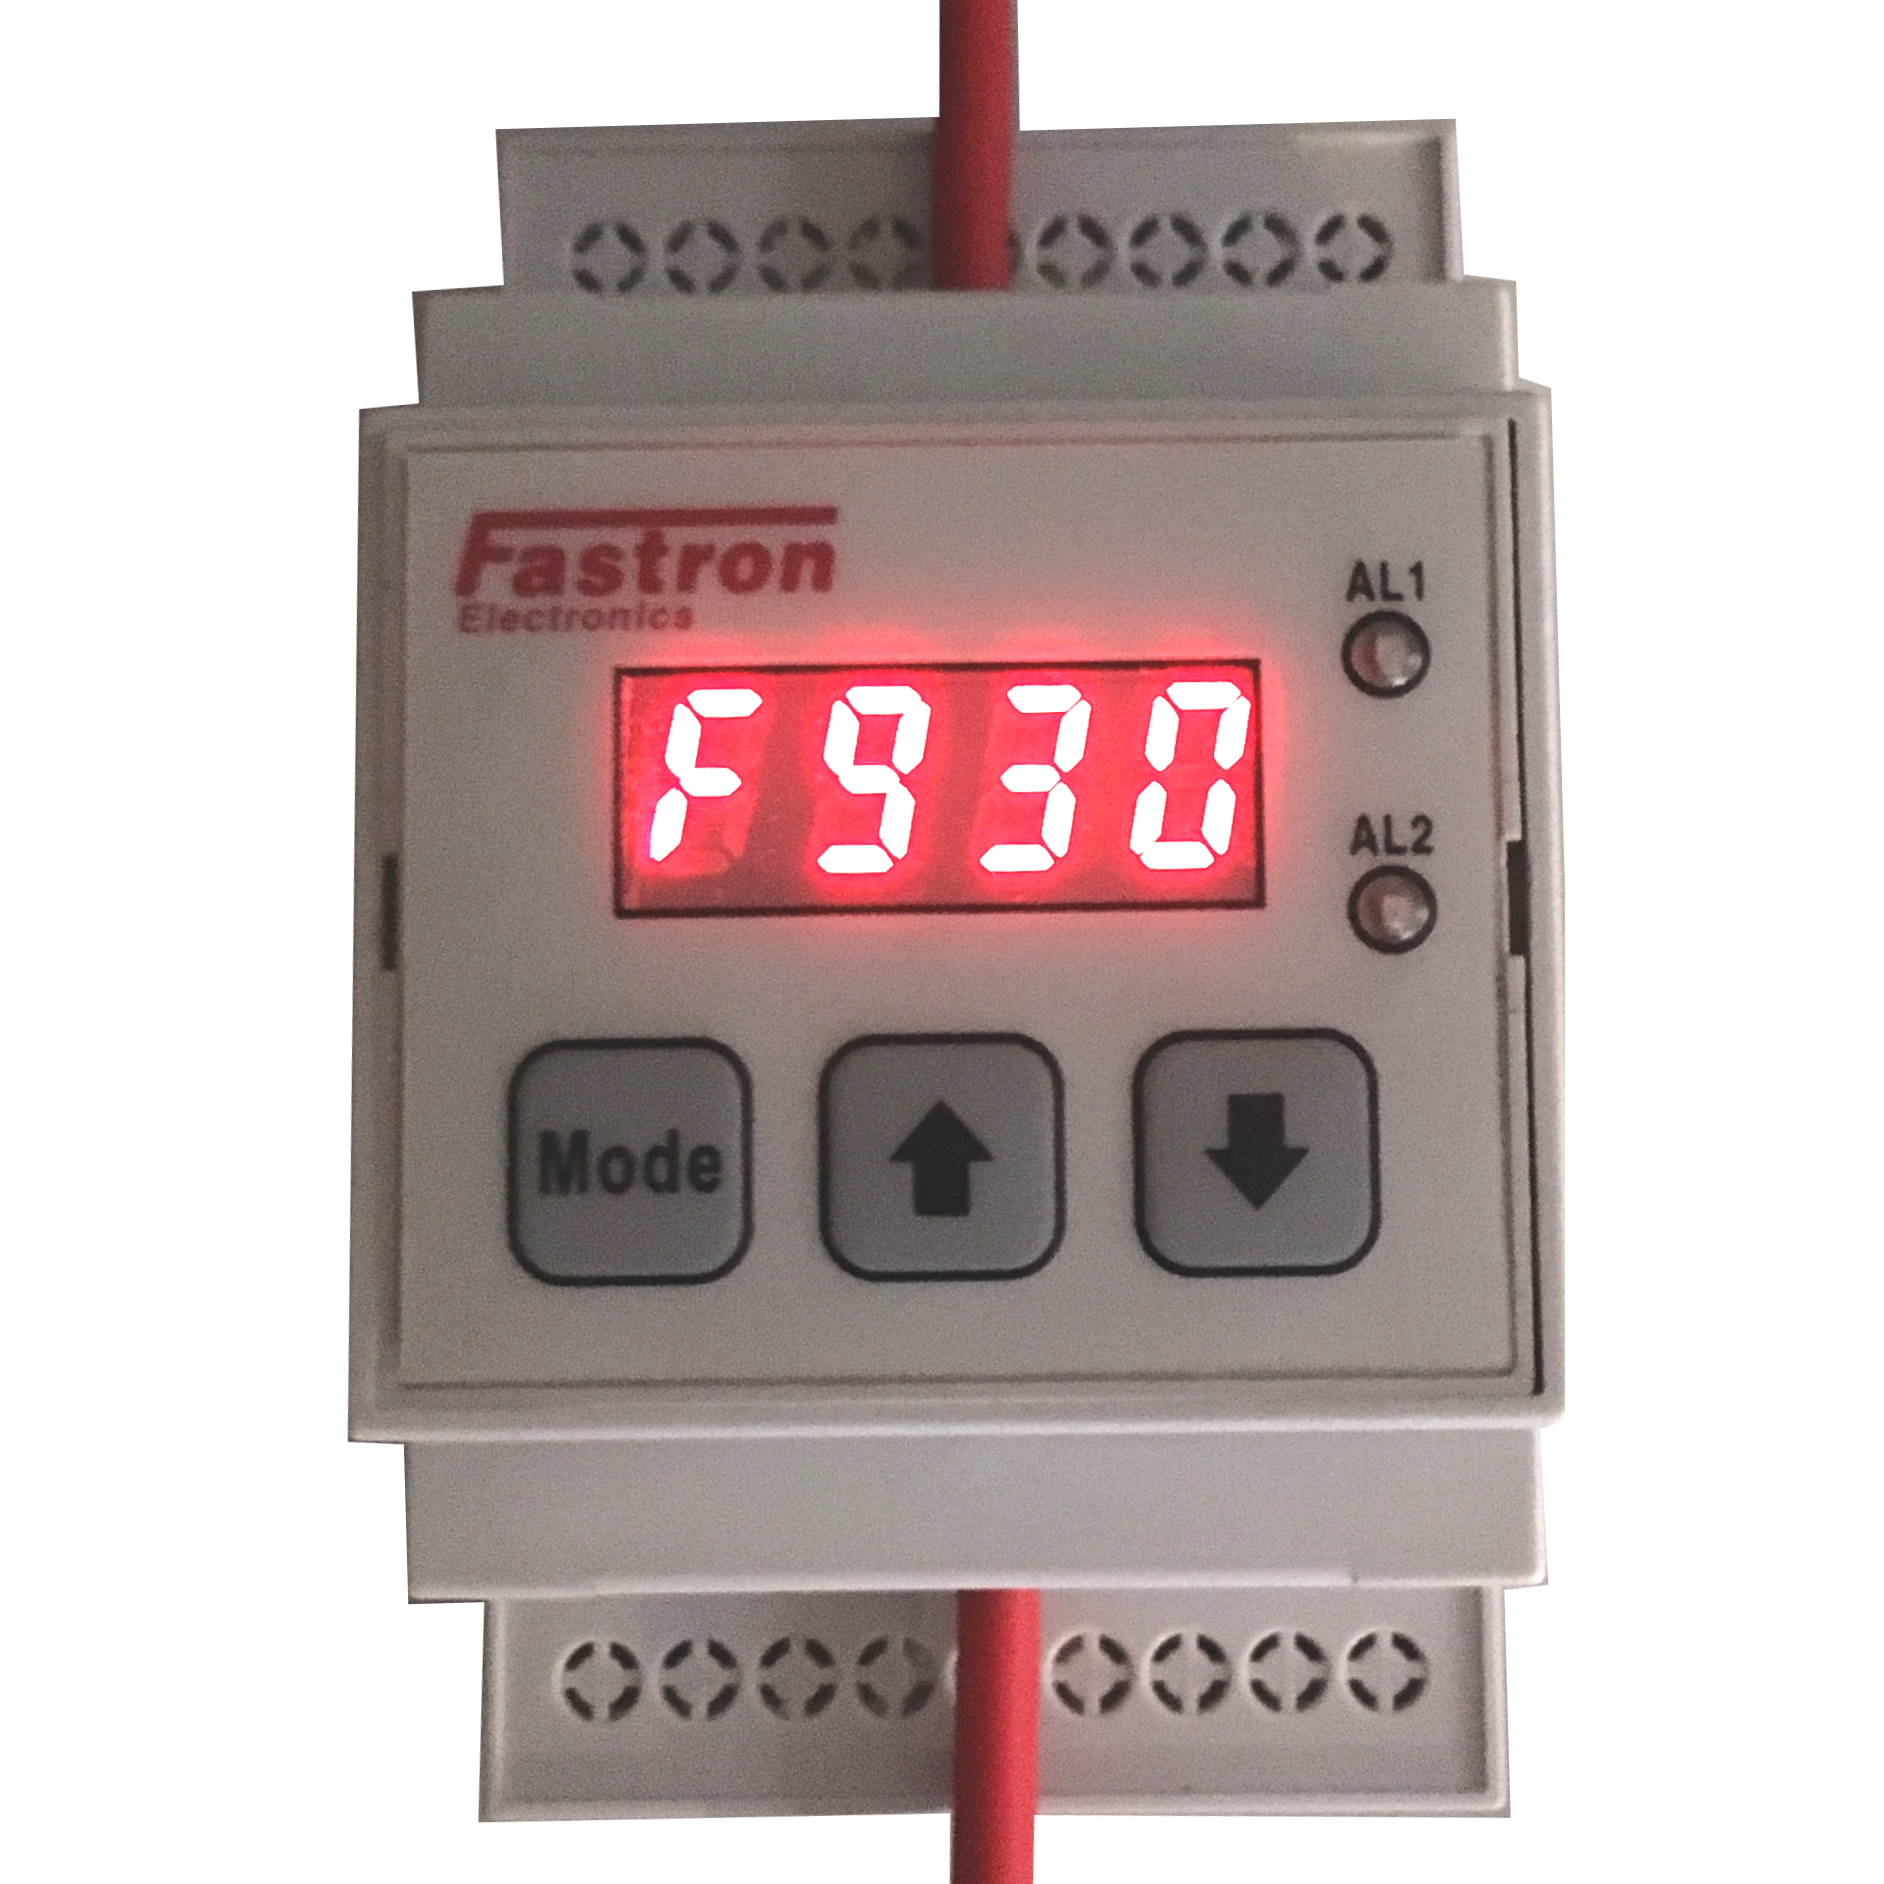 F930 Series Programmable True RMS Various Ranges 10mA - 250 Amp AC/DC Current Transducer with 4 Digit LED Display, Selectable Process Level Outputs, Optional RS485